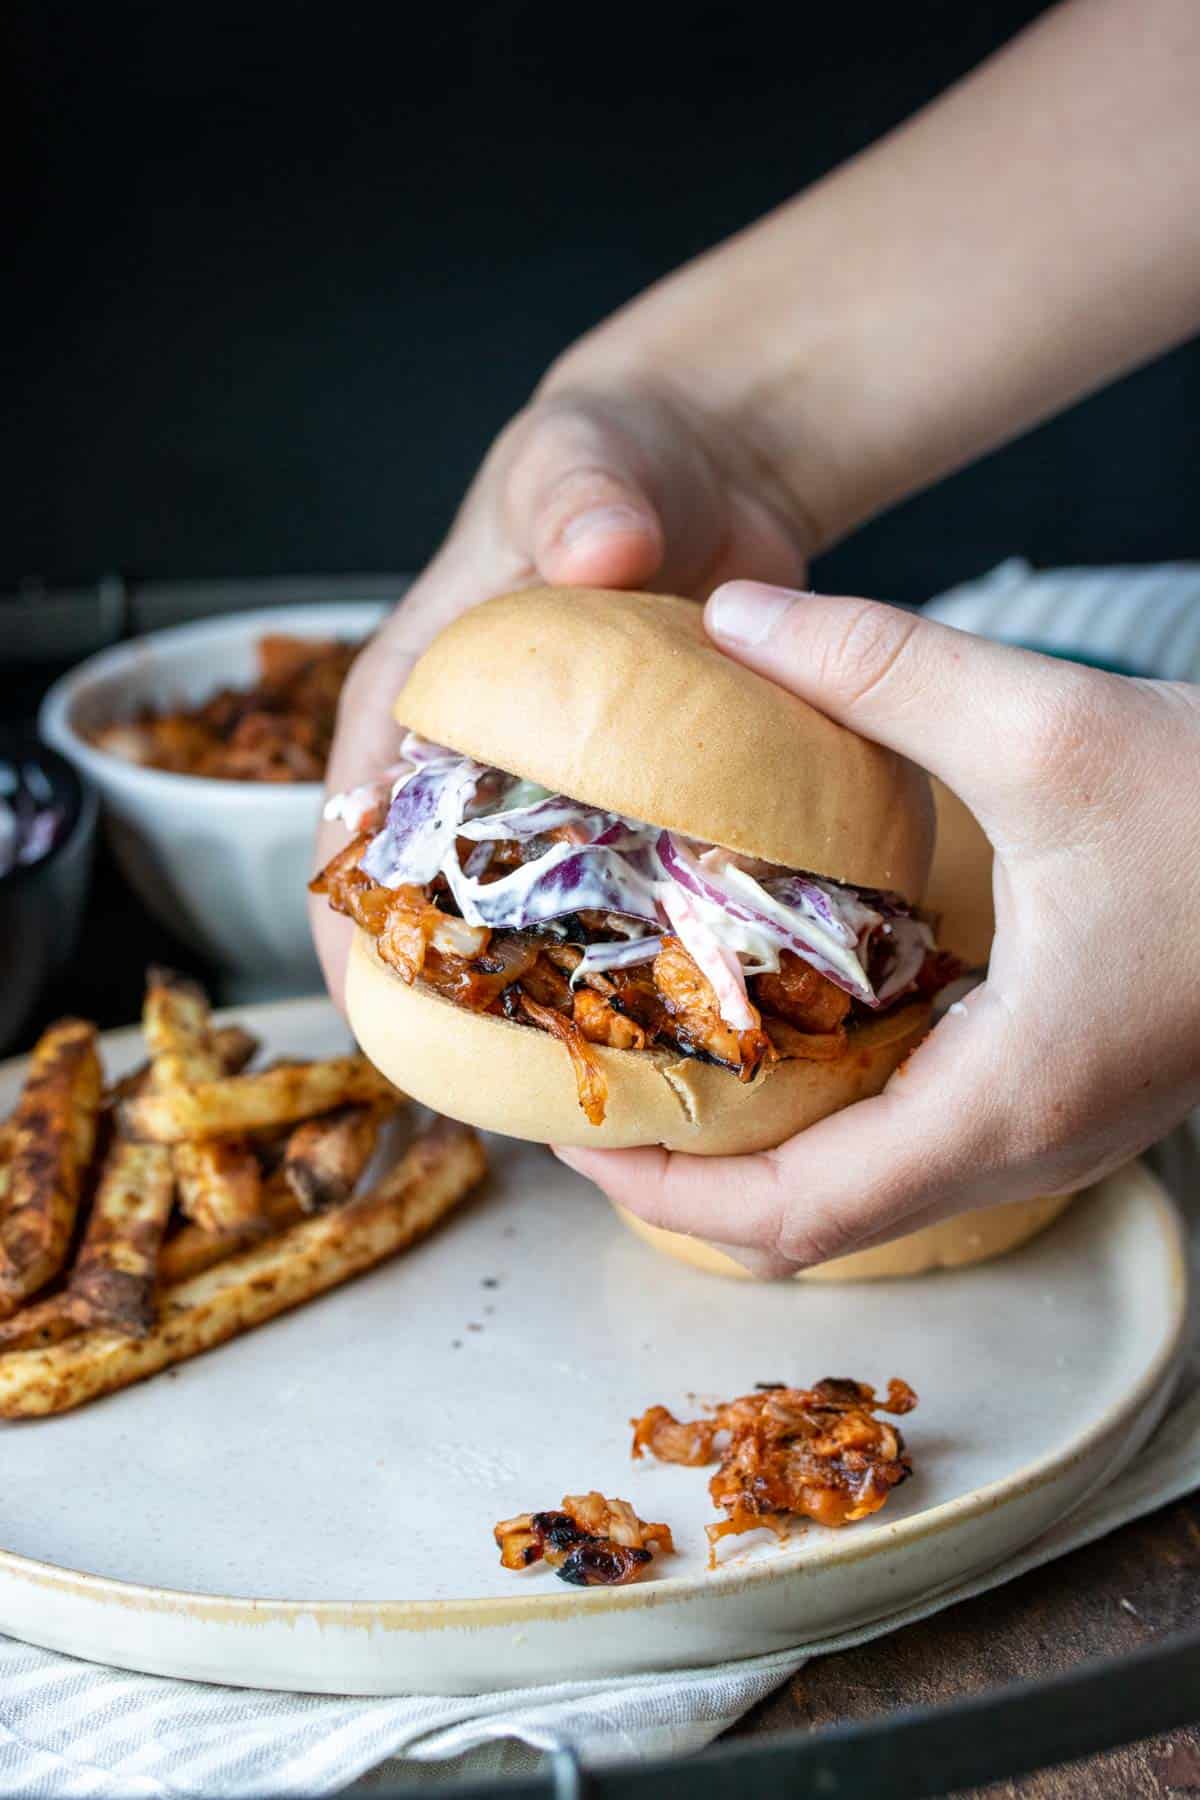 Hands picking up a BBQ jackfruit sandwich topped with coleslaw off a plate.